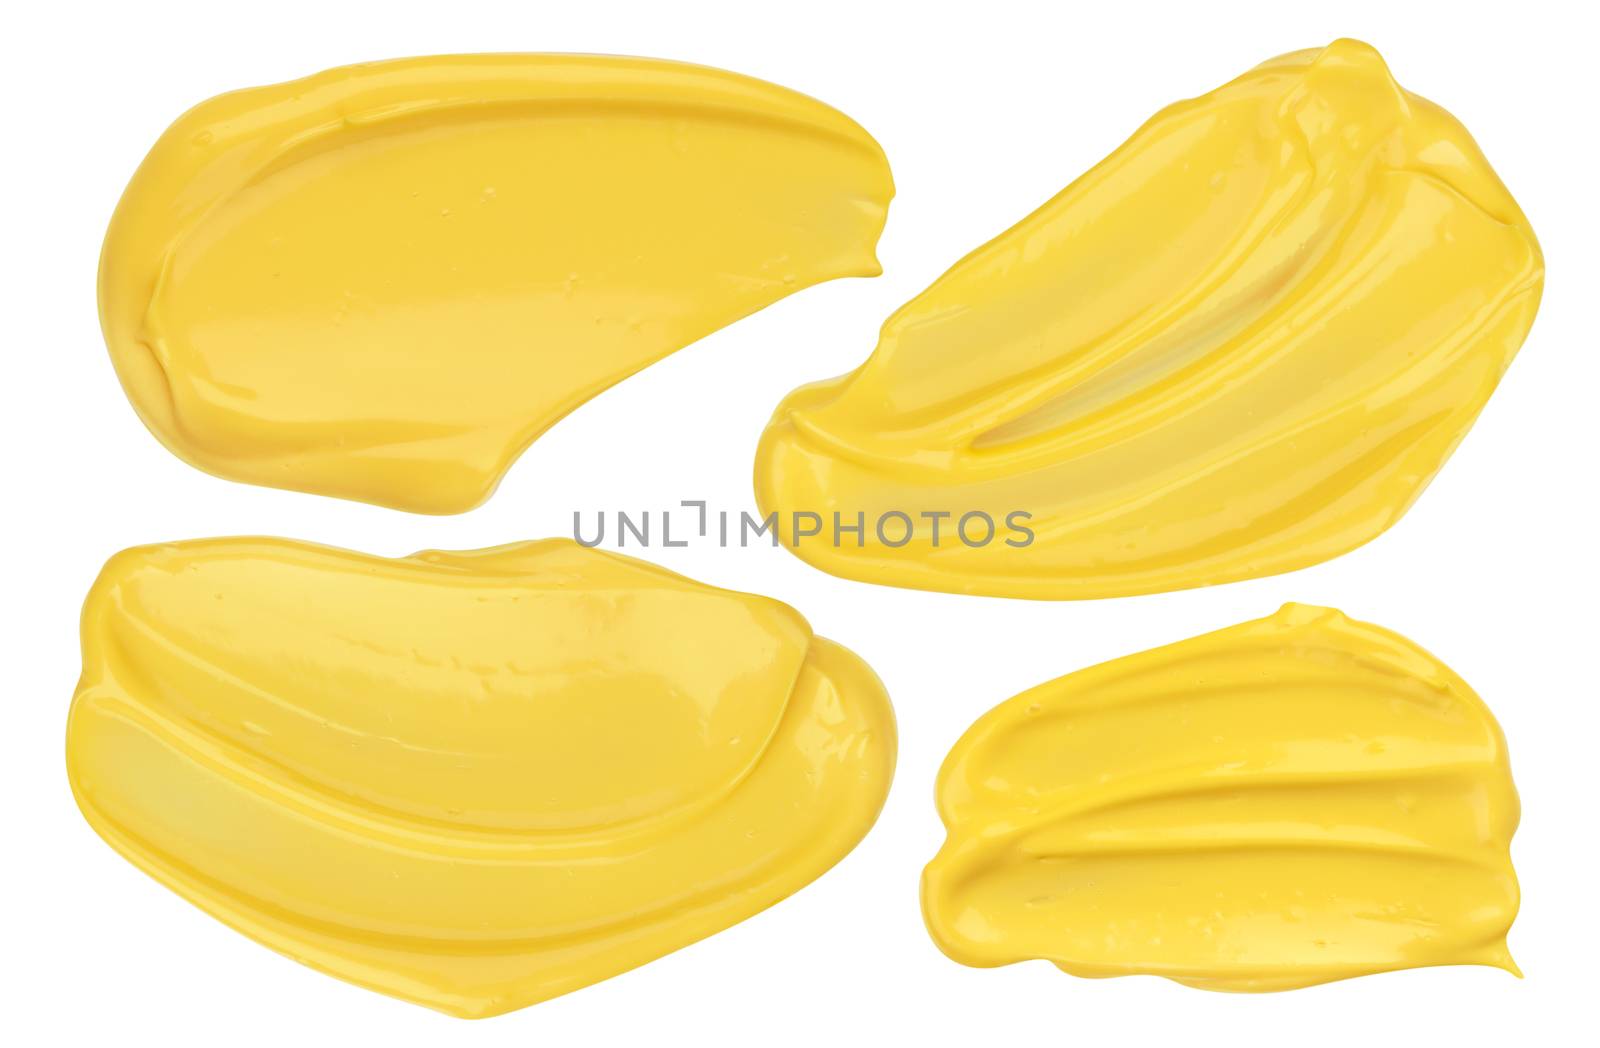 Handful of mayonnaise isolated on white background with clipping path